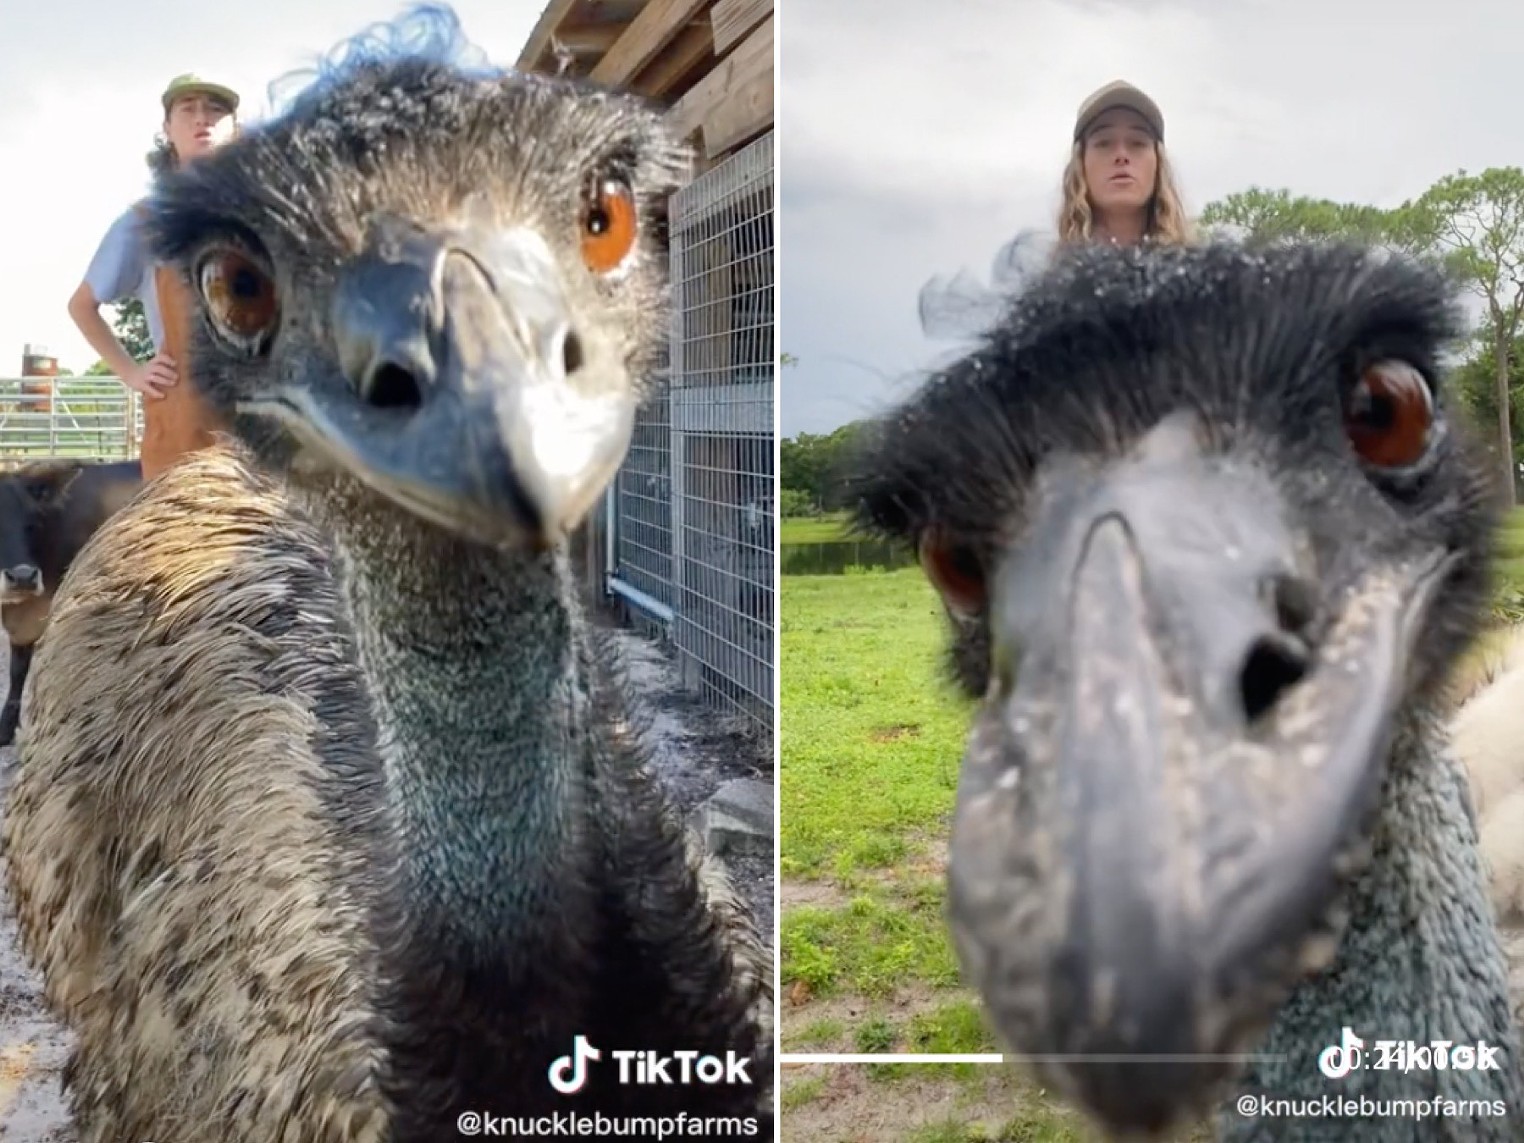 Florida Emu Goes Viral With Impertinent Antics at Knuckle Bump Farms